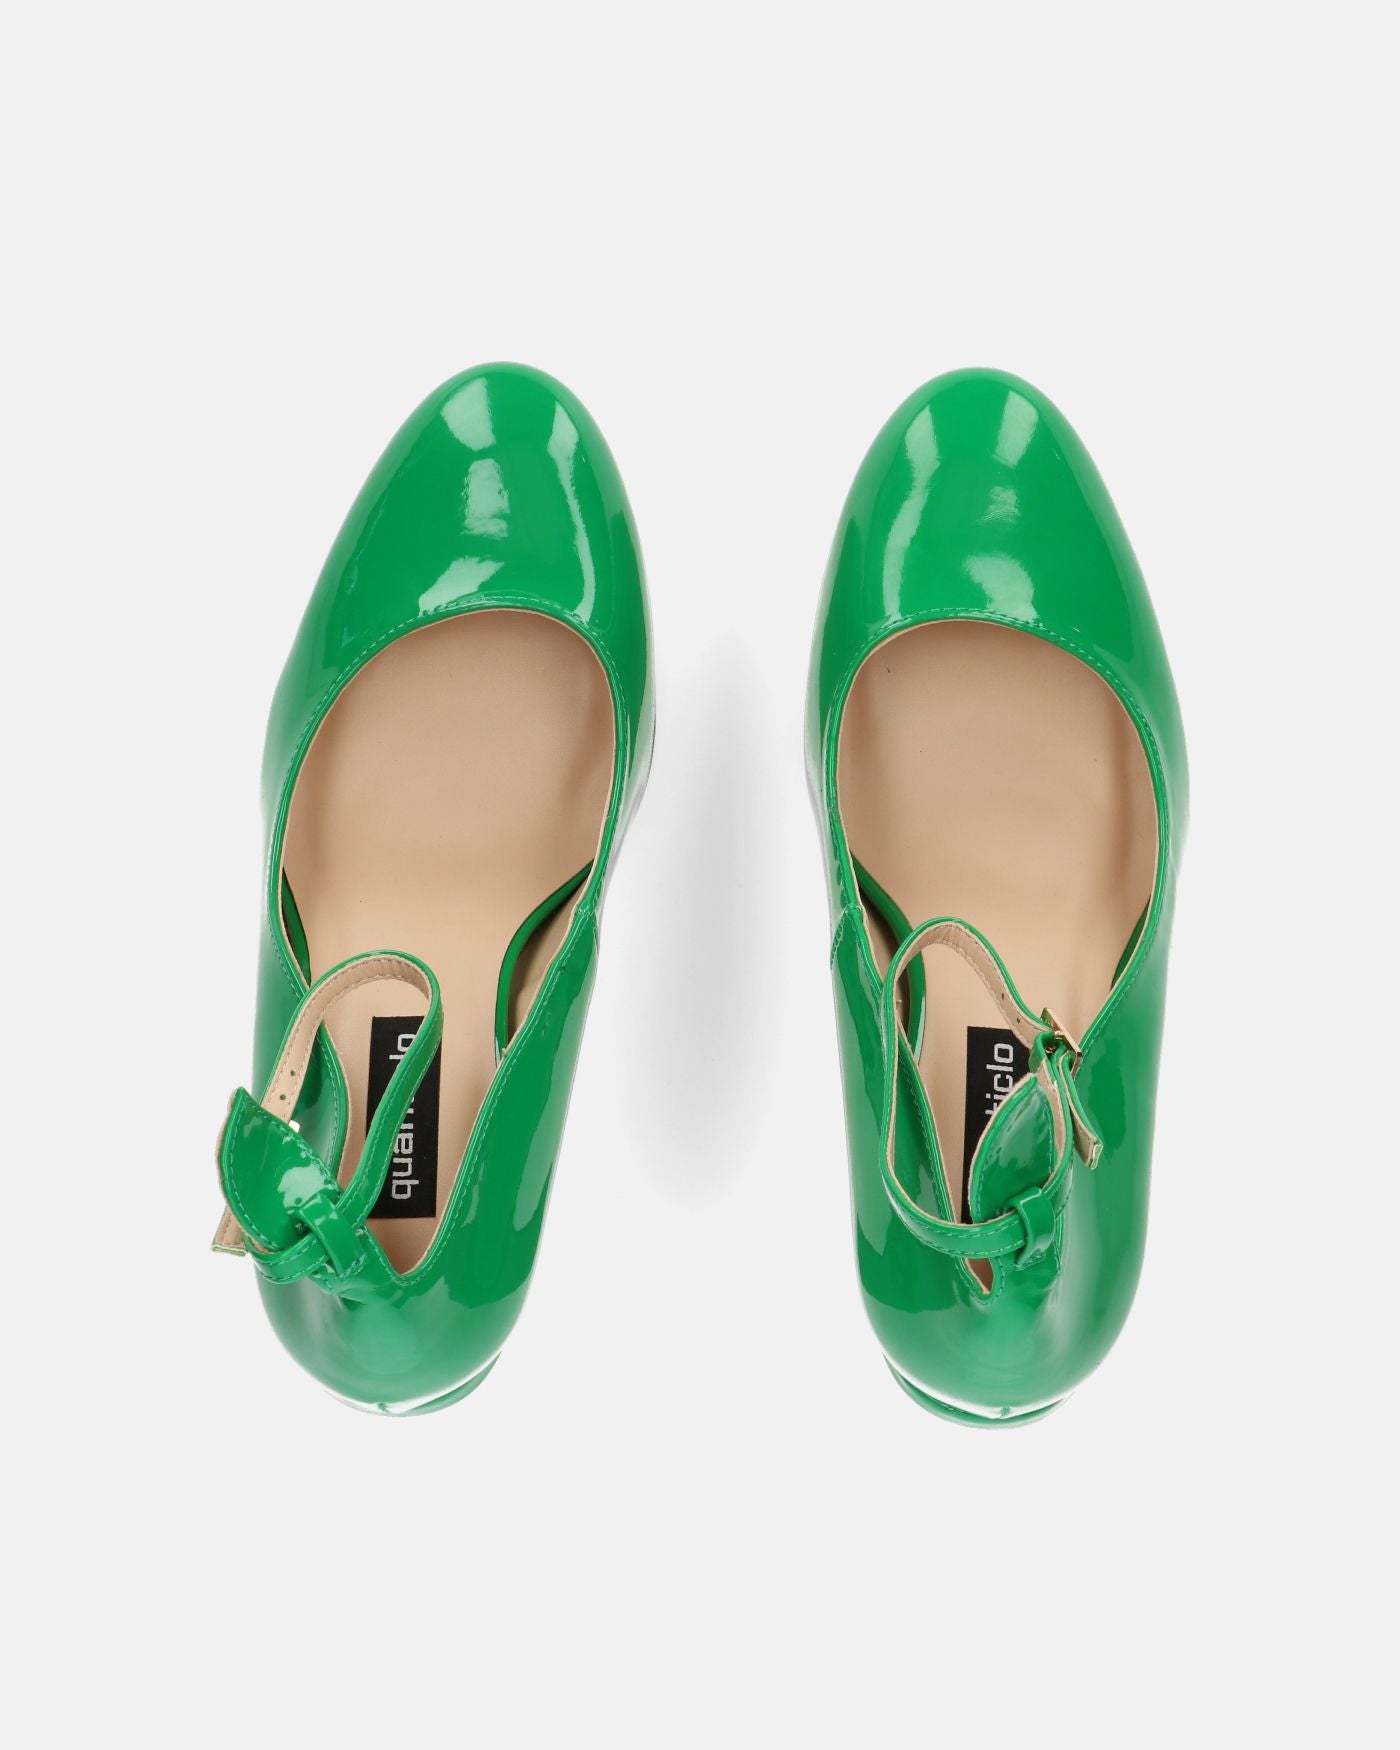 SOLEIL - high-heeled shoes in green glassy